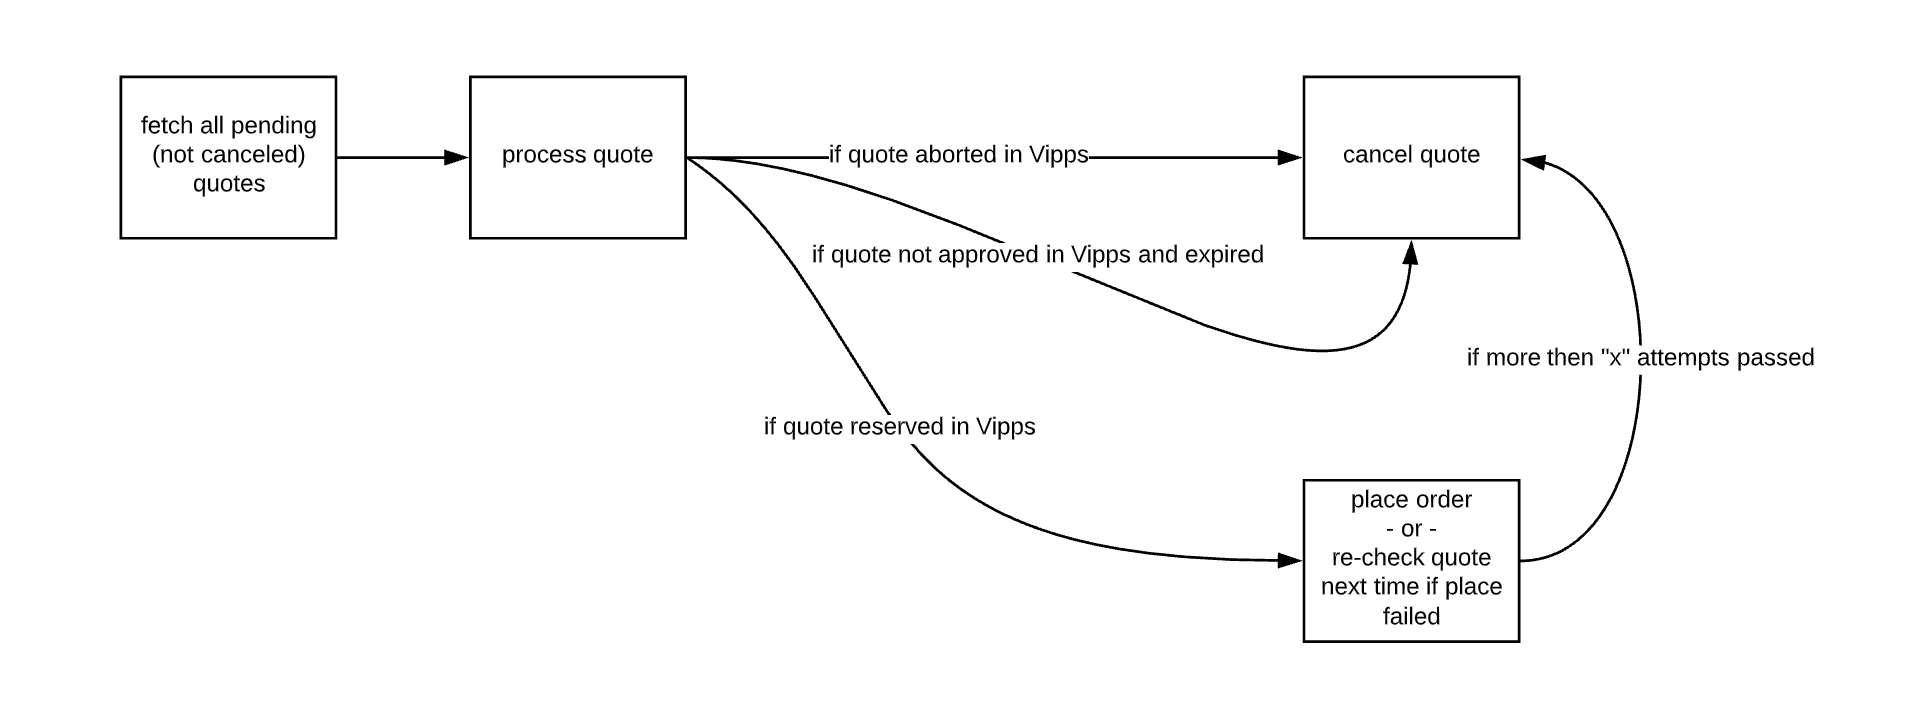 Screenshot of Quote Processing Flow